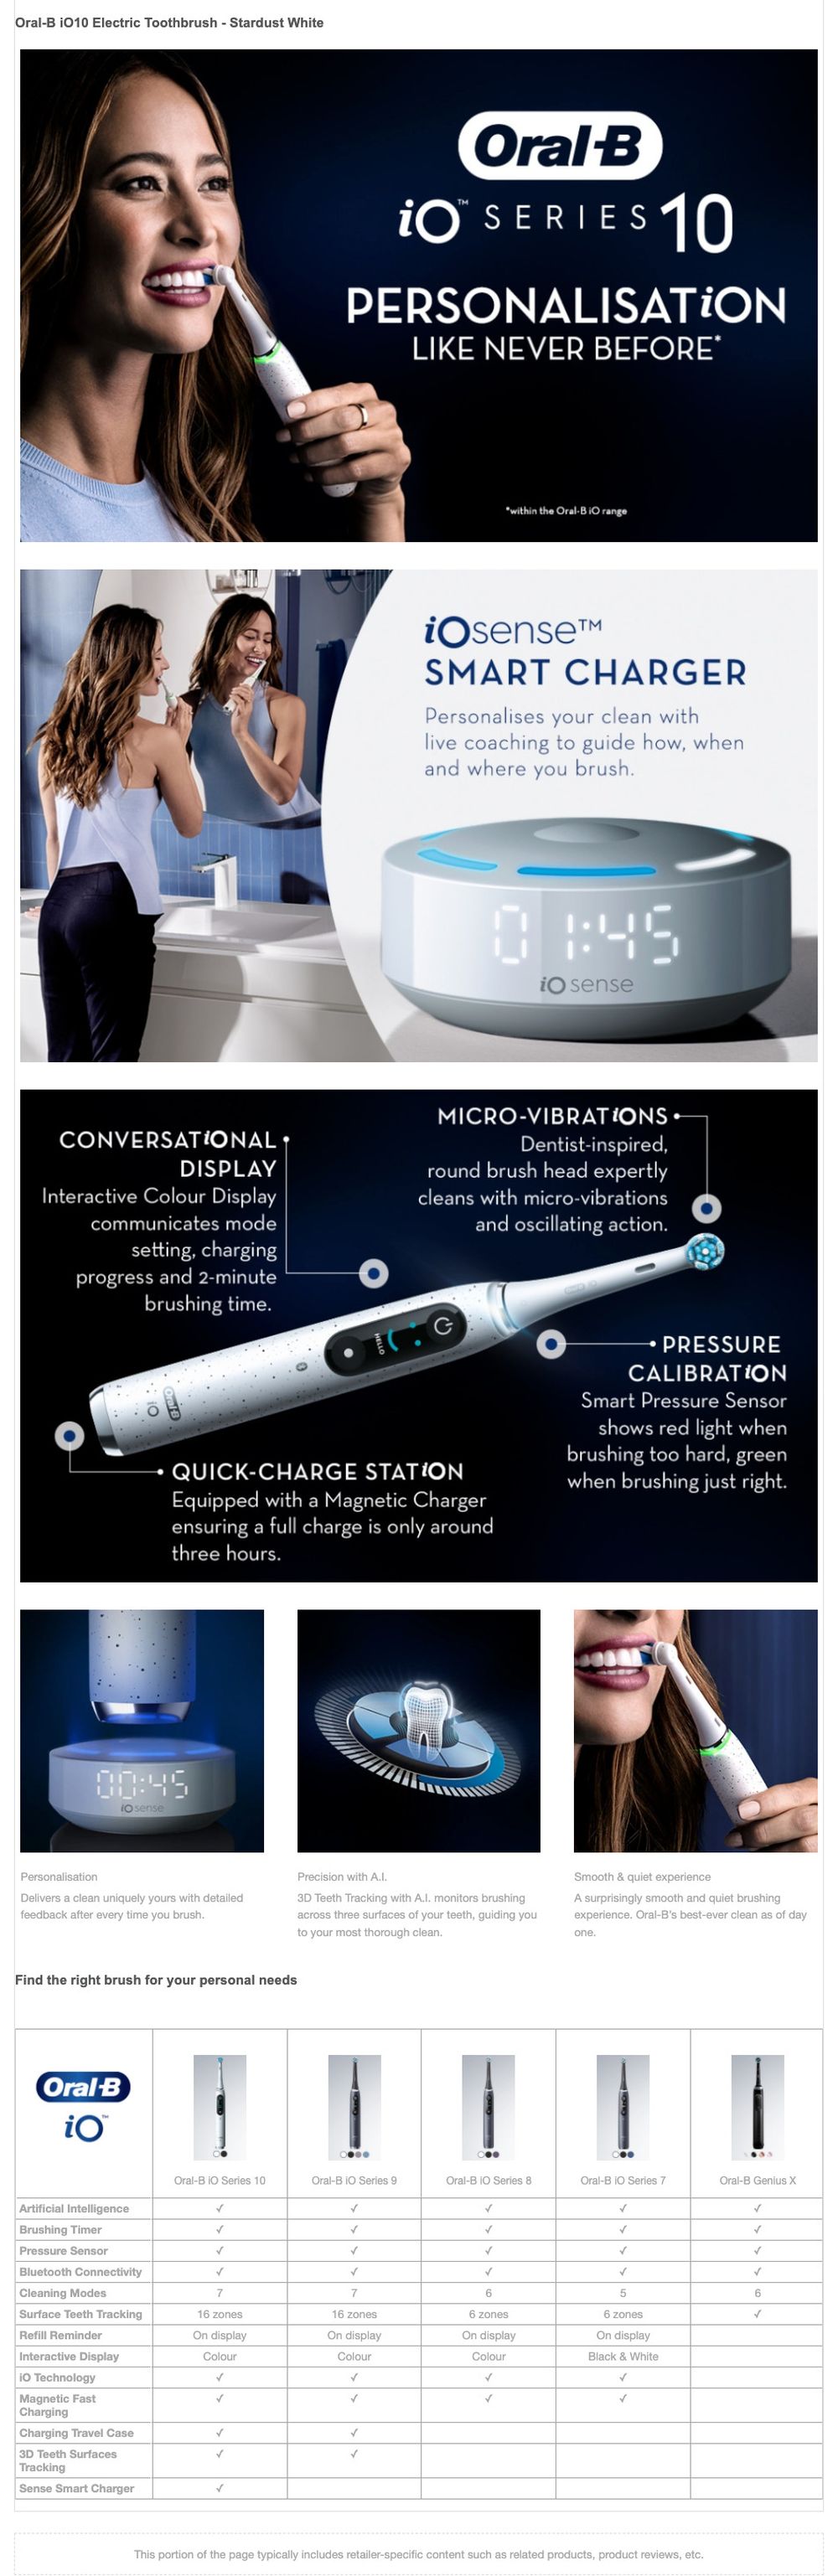 Oral-B iO 10 Electric Toothbrush - Stardust White
                          Oral B FOR SERIES 10 PERSONALISATION LIKE NEVER BEFORE within the Oral-B 10 range
                          iO senset SMART CHARGER Personalises your clean with live coaching to guide how, when and where you brush.
                          io sense
                          CONVERSATIONAL DISPLAY Interactive Colour Display communicates mode setting, charging progress and 2-minute brushing time.
                          MICRO-VIBRATIONS Dentist-inspired round brush head expertly cleans with micro-vibrations and oscillating action.
                          PRESSURE CALIBRATION Smart Pressure Sensor shows red light when brushing too hard, green when brushing just right.
                          QUICK-CHARGE STATION Equipped with a Magnetic Charger ensuring a full charge is only around three hours.
                          Personalisation Delivers a clean uniquely yours with detailed feedback after every time you brush.
                          Precision with A.I 3D Teeth Tracking with A.I. monitors brushing across three surfaces of your teeth, guiding you to your most thorough clean.
                          Smooth & quiet experience A surprisingly smooth and quiet brushing experience. Oral-B's best-ever clean as of day one.
                          Find the right brush for your personal needs
                          Oral B
                          io
                          IO Technology
                          Magnetic Fast Charging Charging Travel Case 3D Teeth Surfaces Tracking Sense Smart Charger
                          This portion of the page typically includes retailer-specific content such as related products, product reviews.